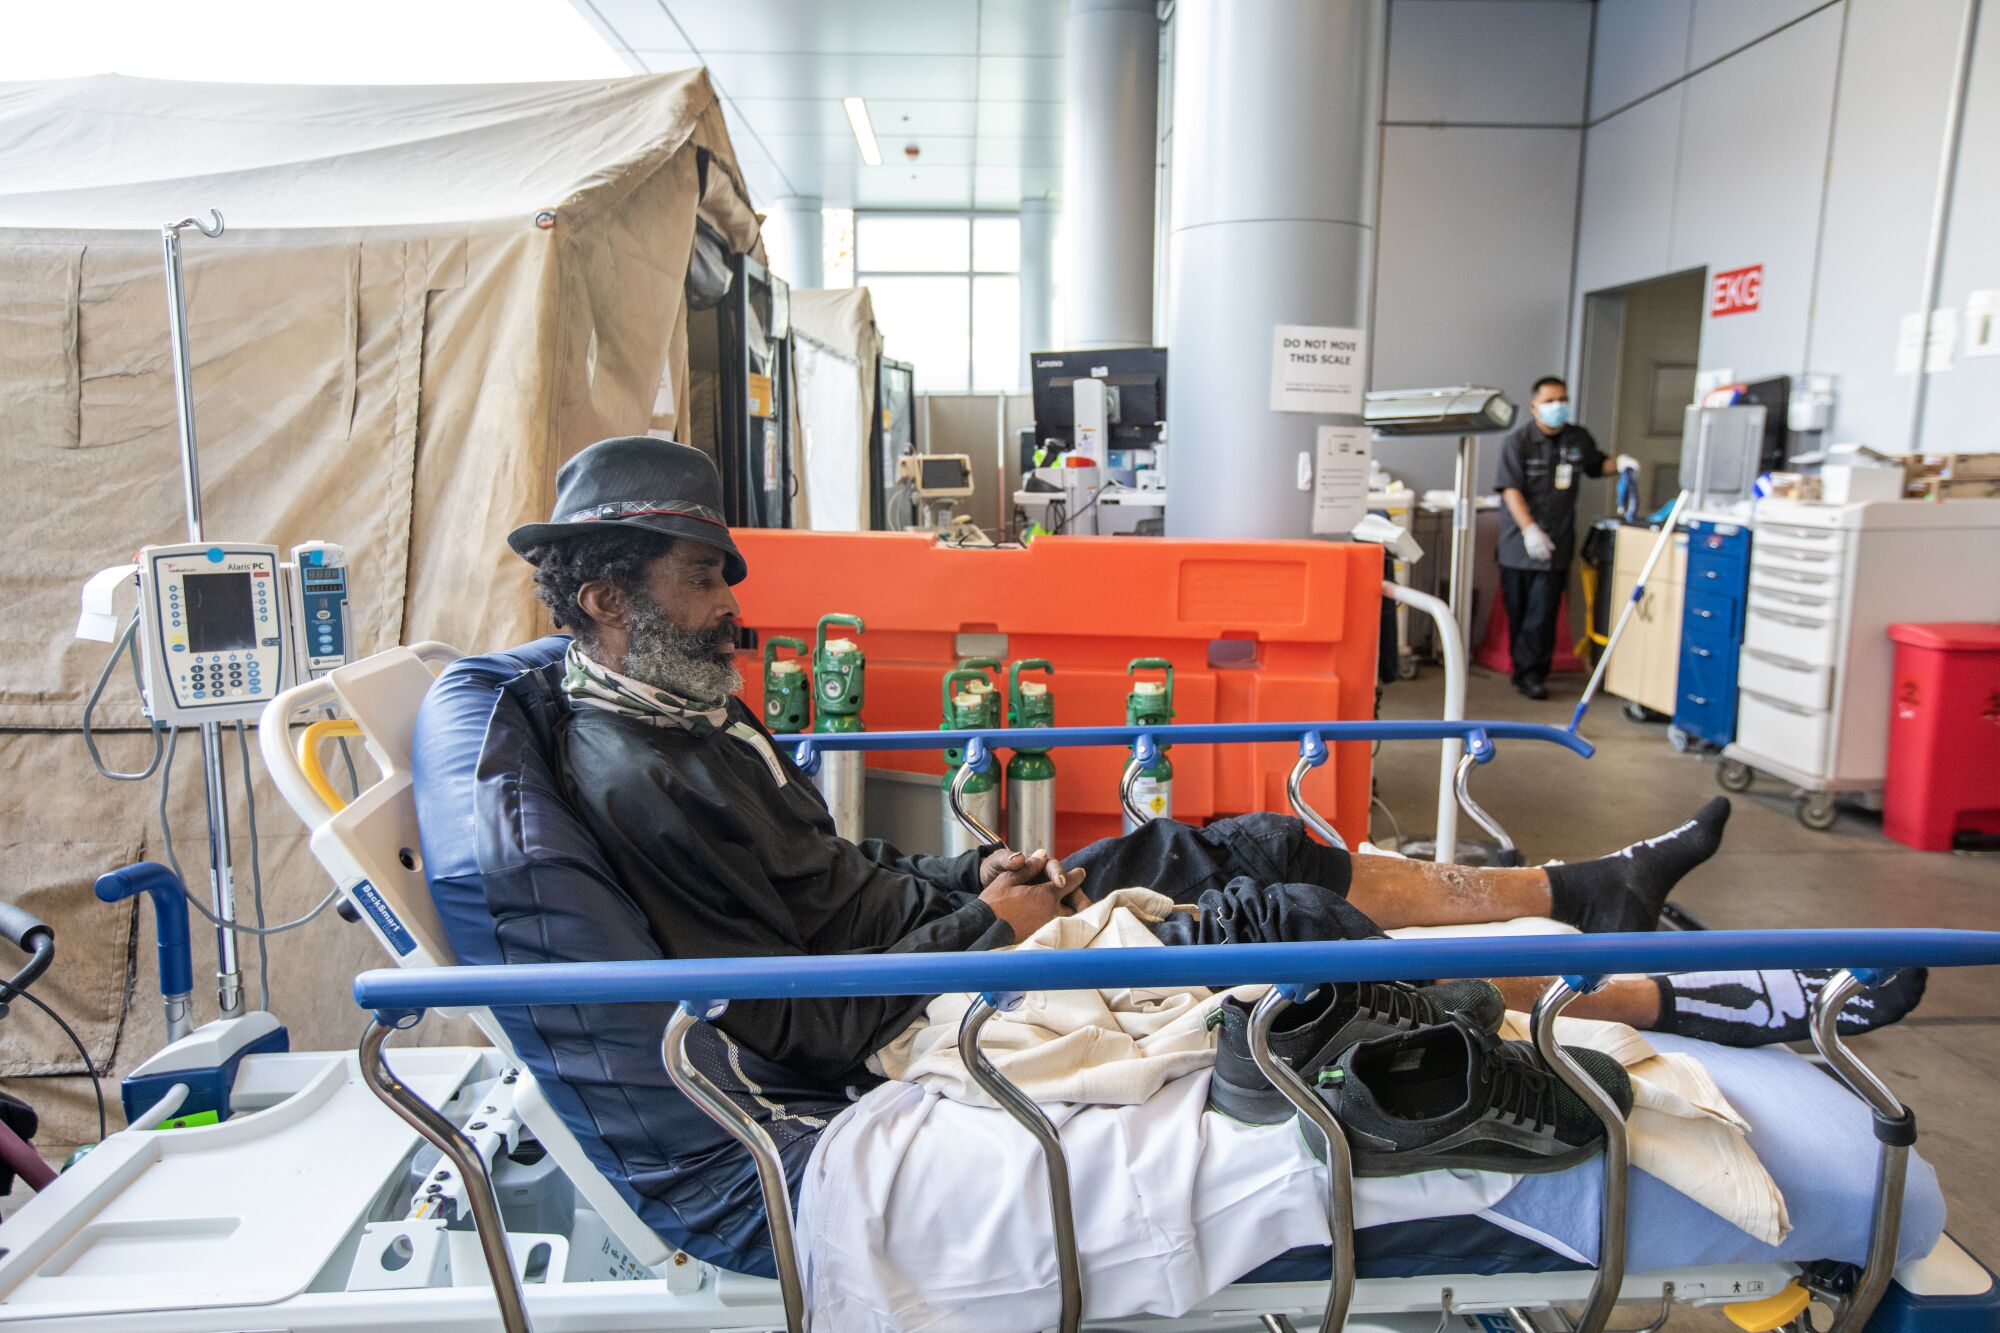 A man in a hat is lying on a hospital bed